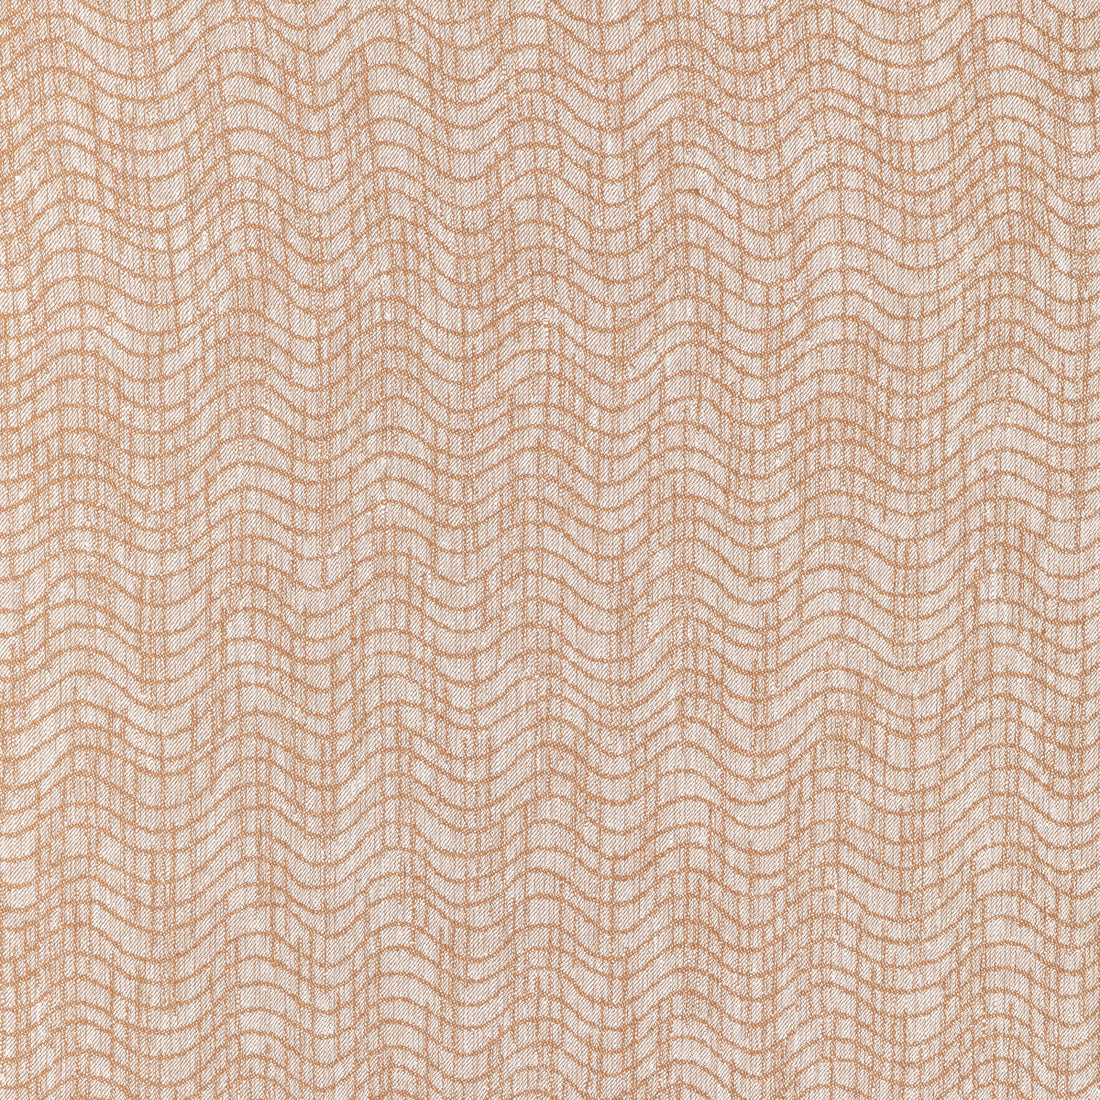 Dadami fabric in clay color - pattern GWF-3801.24.0 - by Lee Jofa Modern in the Kelly Wearstler VIII collection